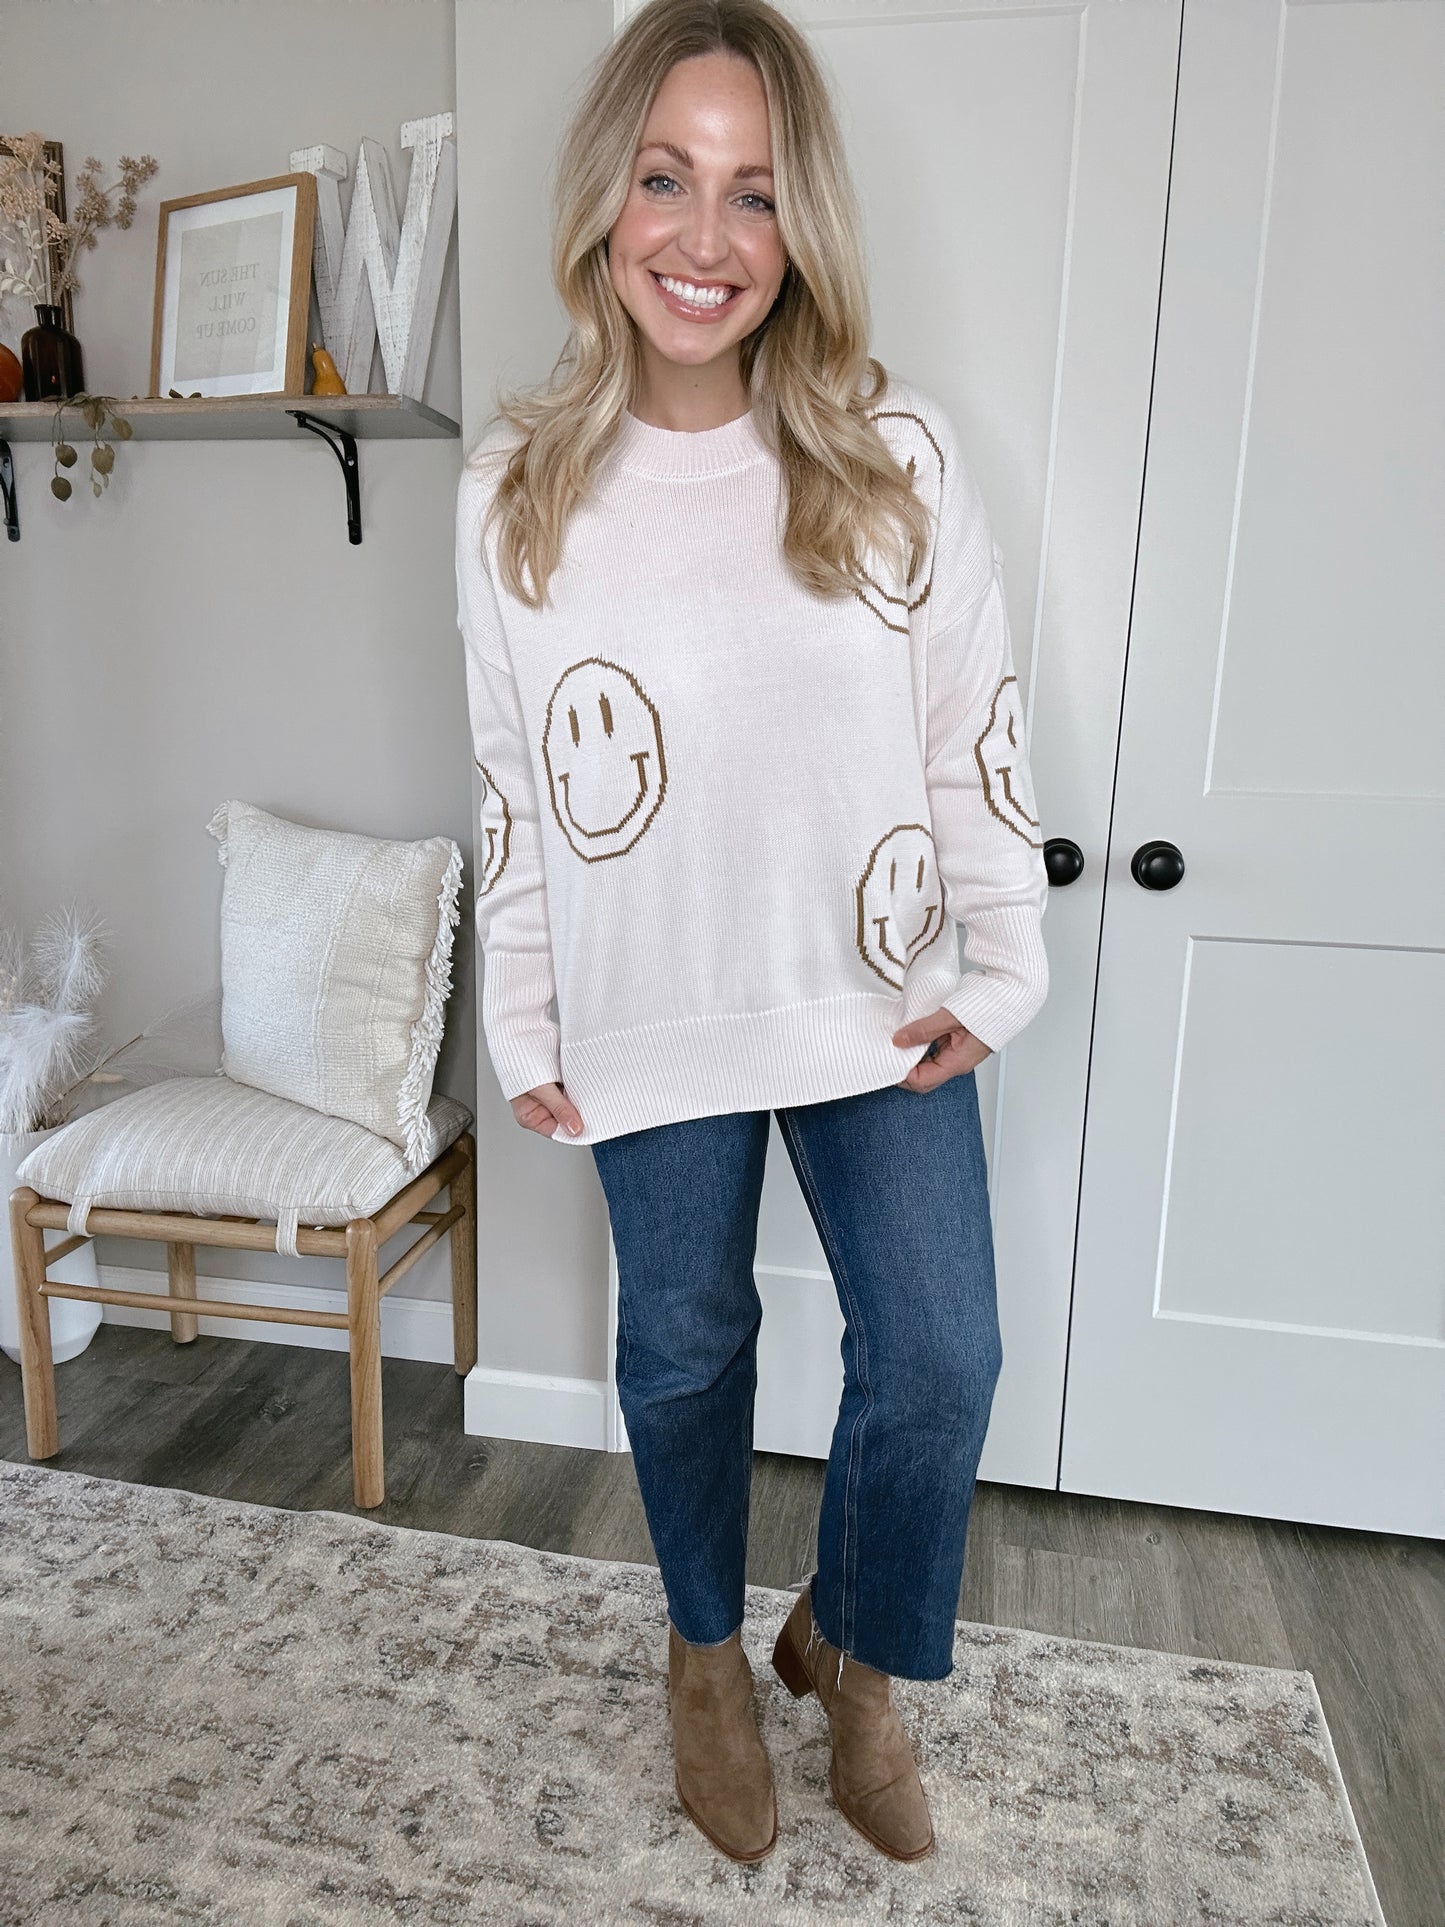 The Smile Sweater